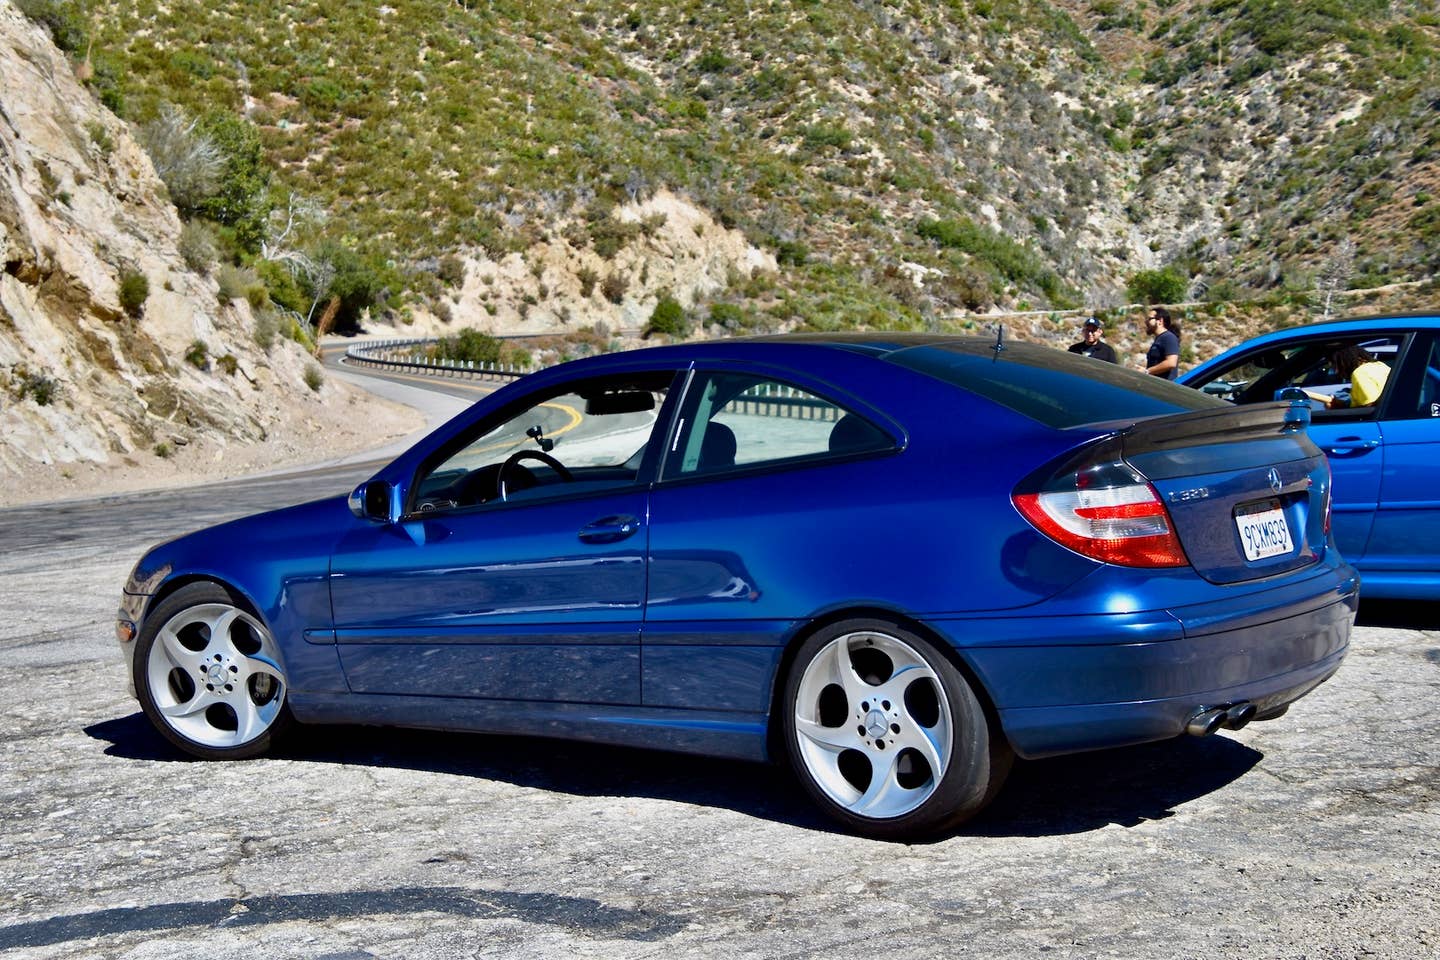 A blue Mercedes C320. It has a fastback roofline, two doors, and a short wheelbase.